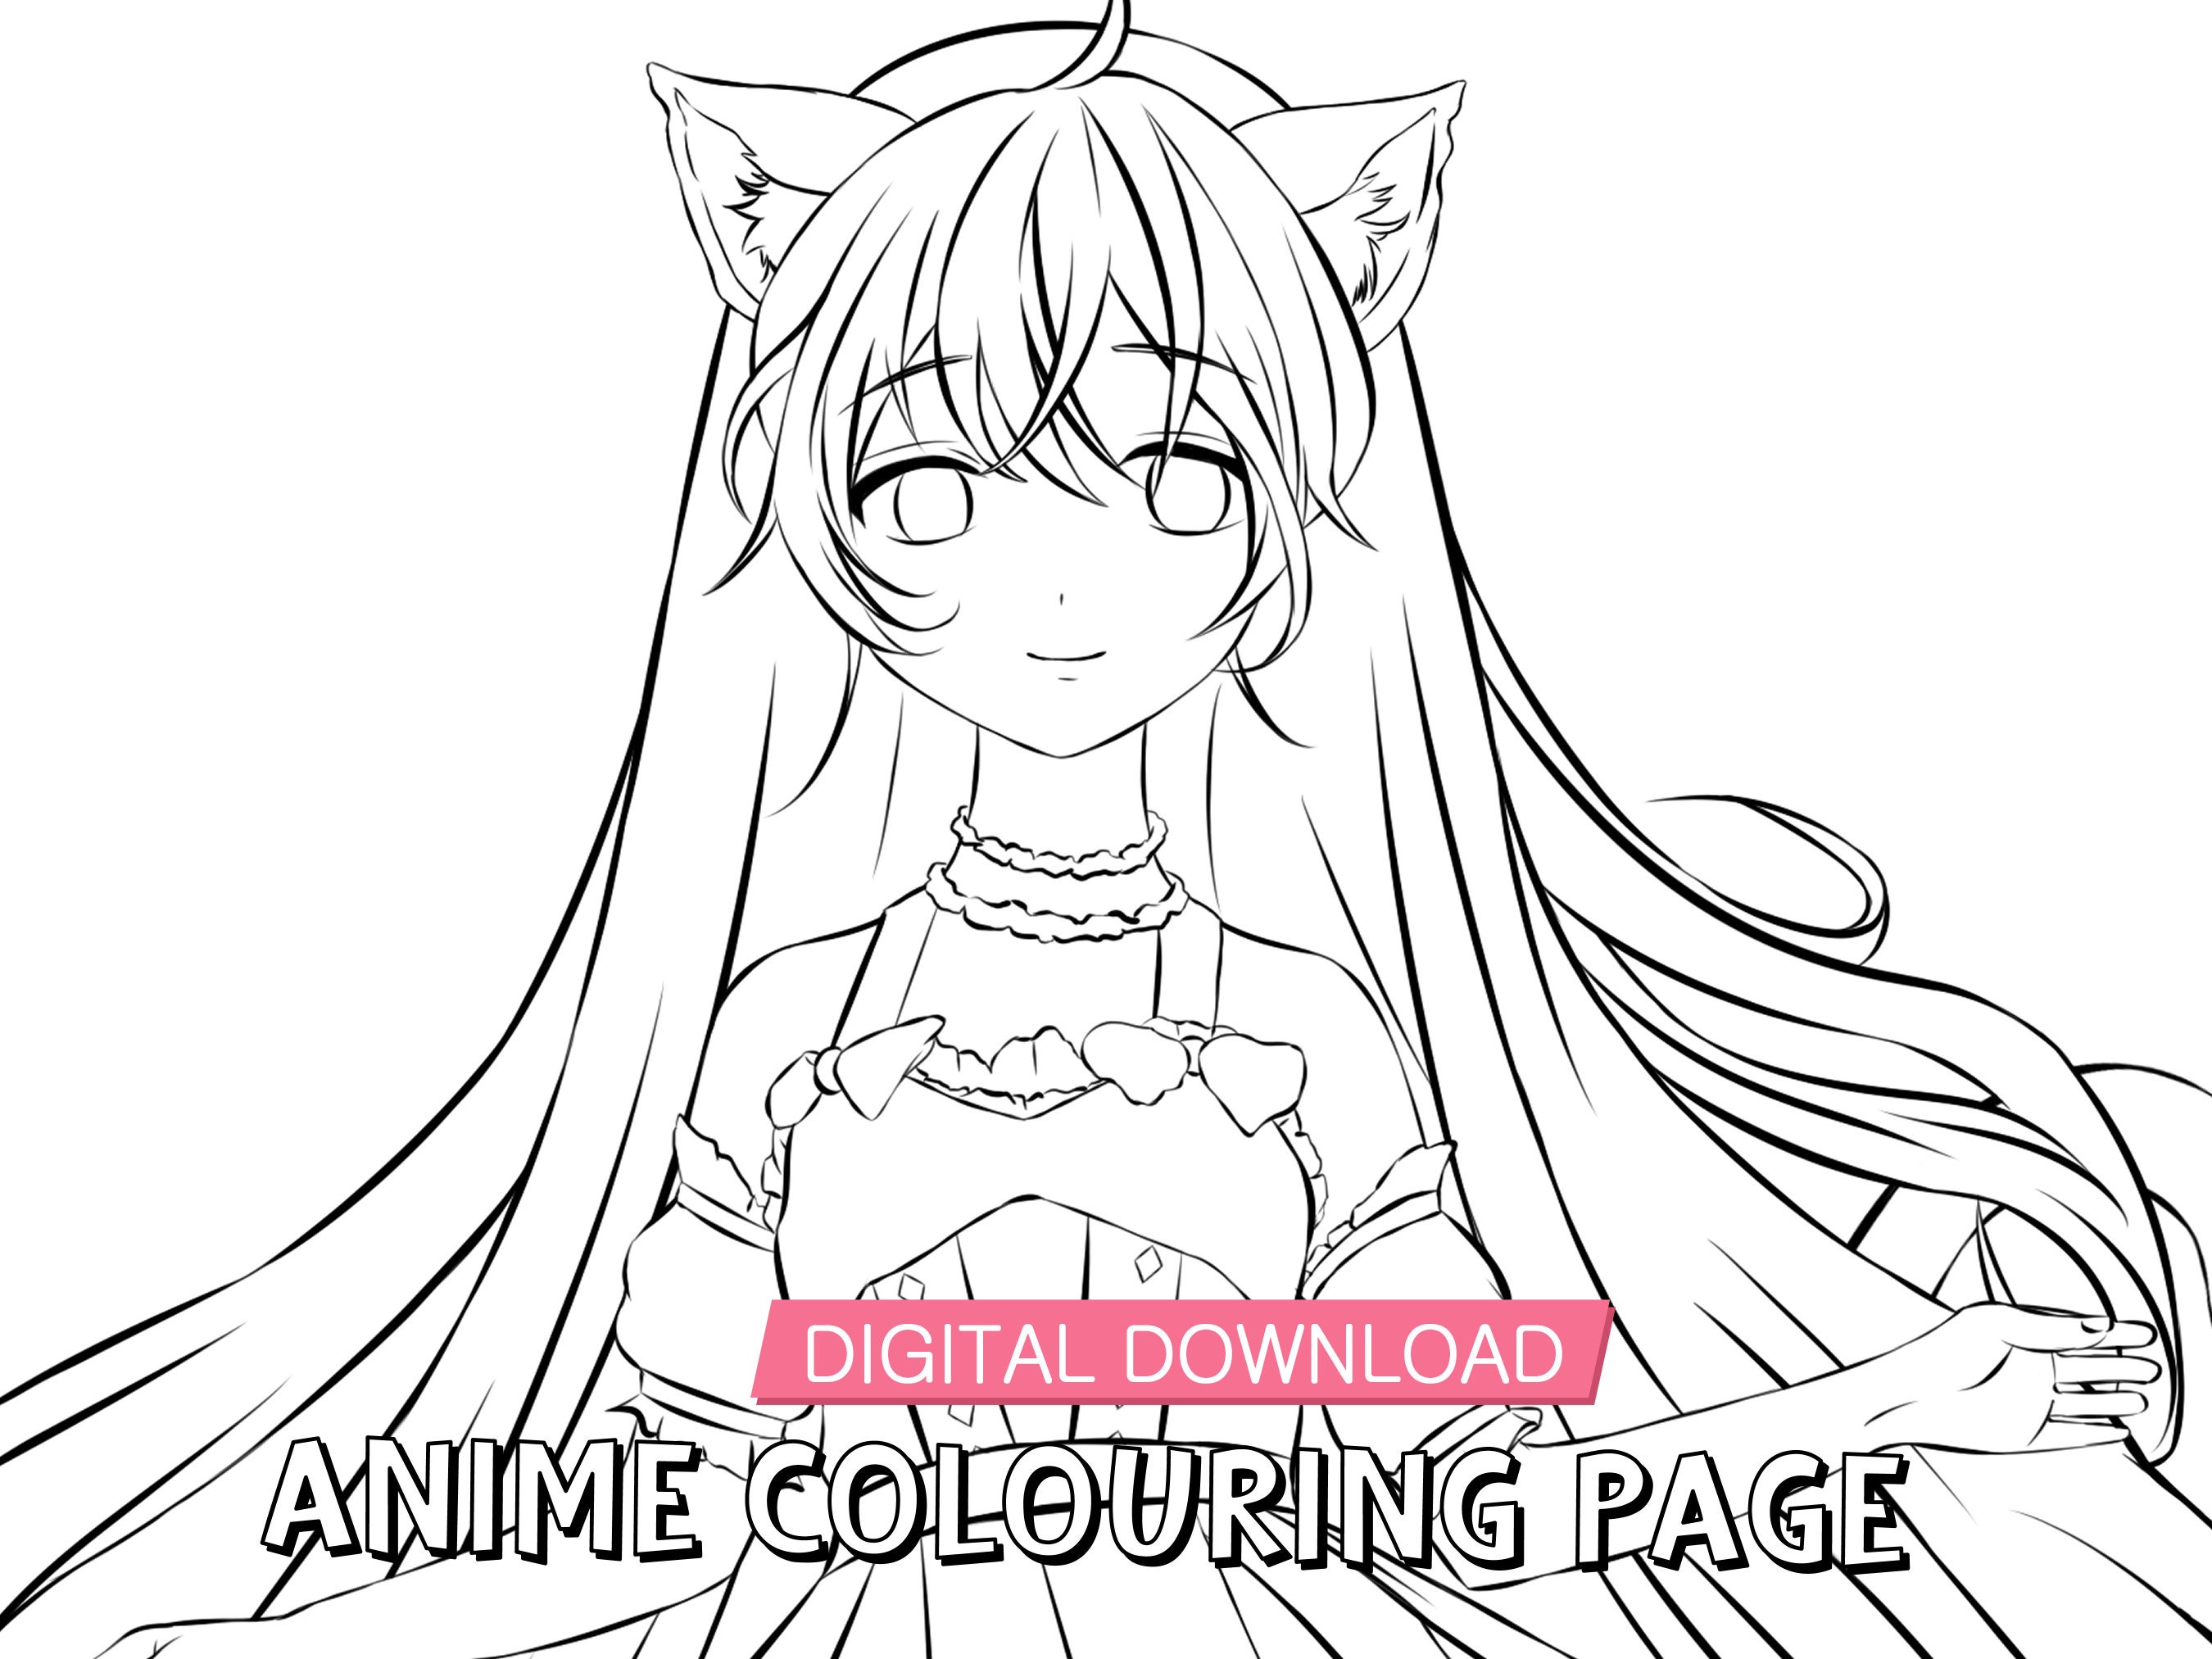 Download Bring Your Drawing to Life with Anime Coloring | Wallpapers.com